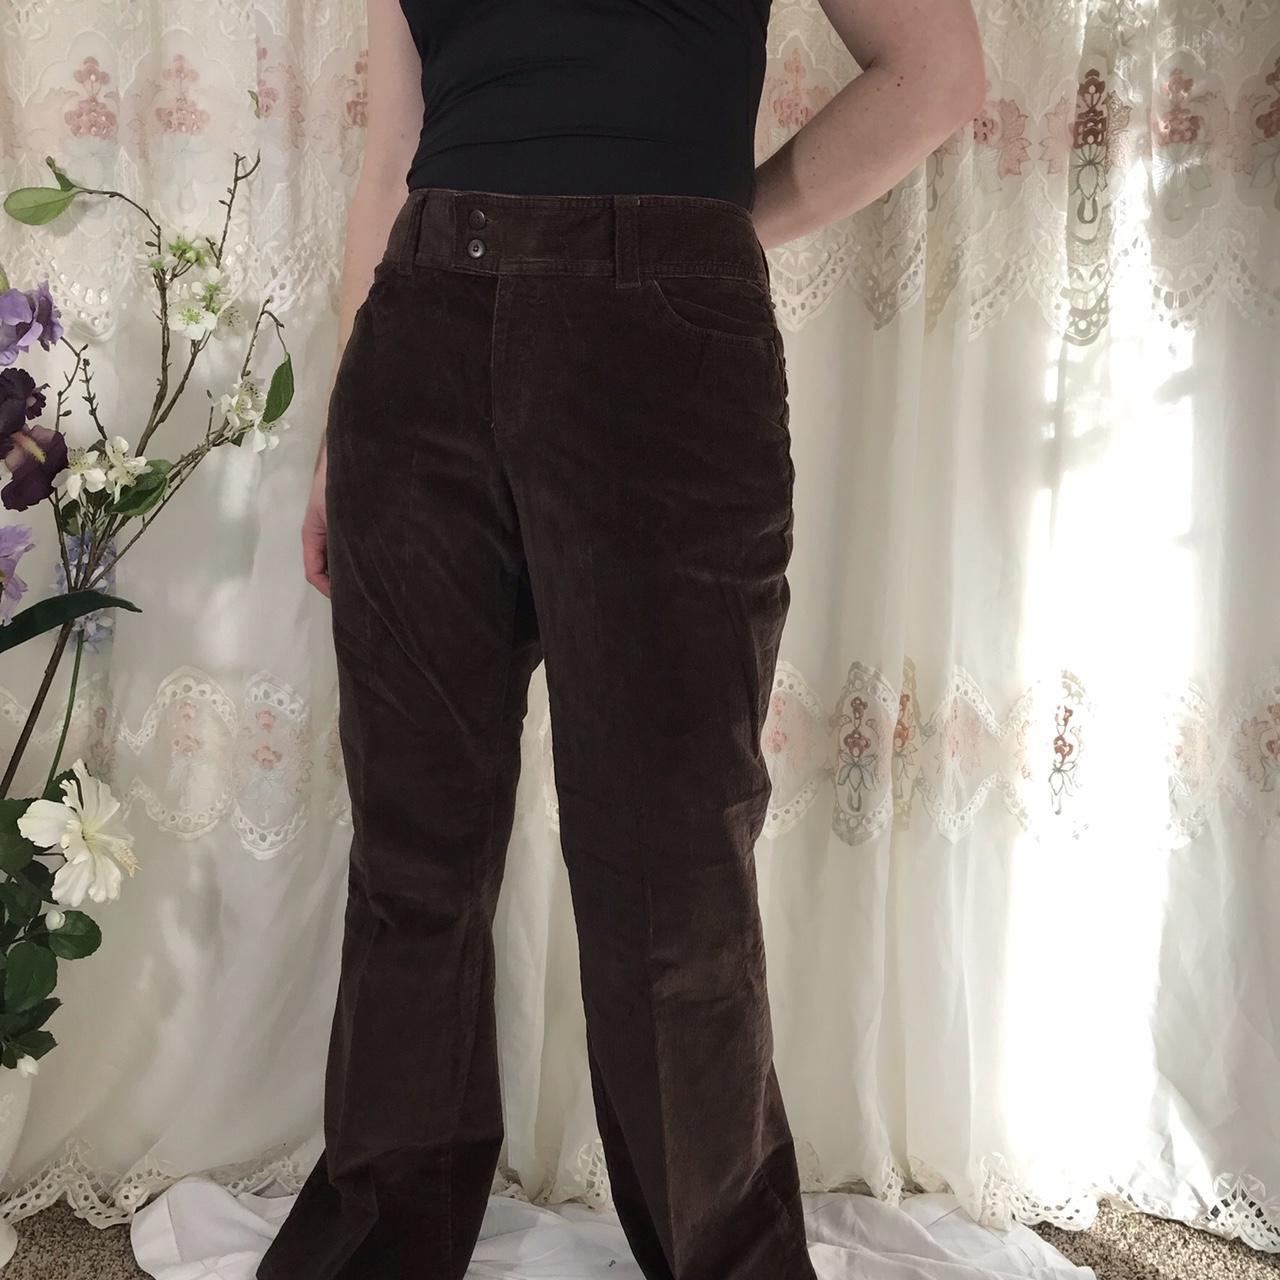 Product Image 1 - Rich brown wide leg corduroy